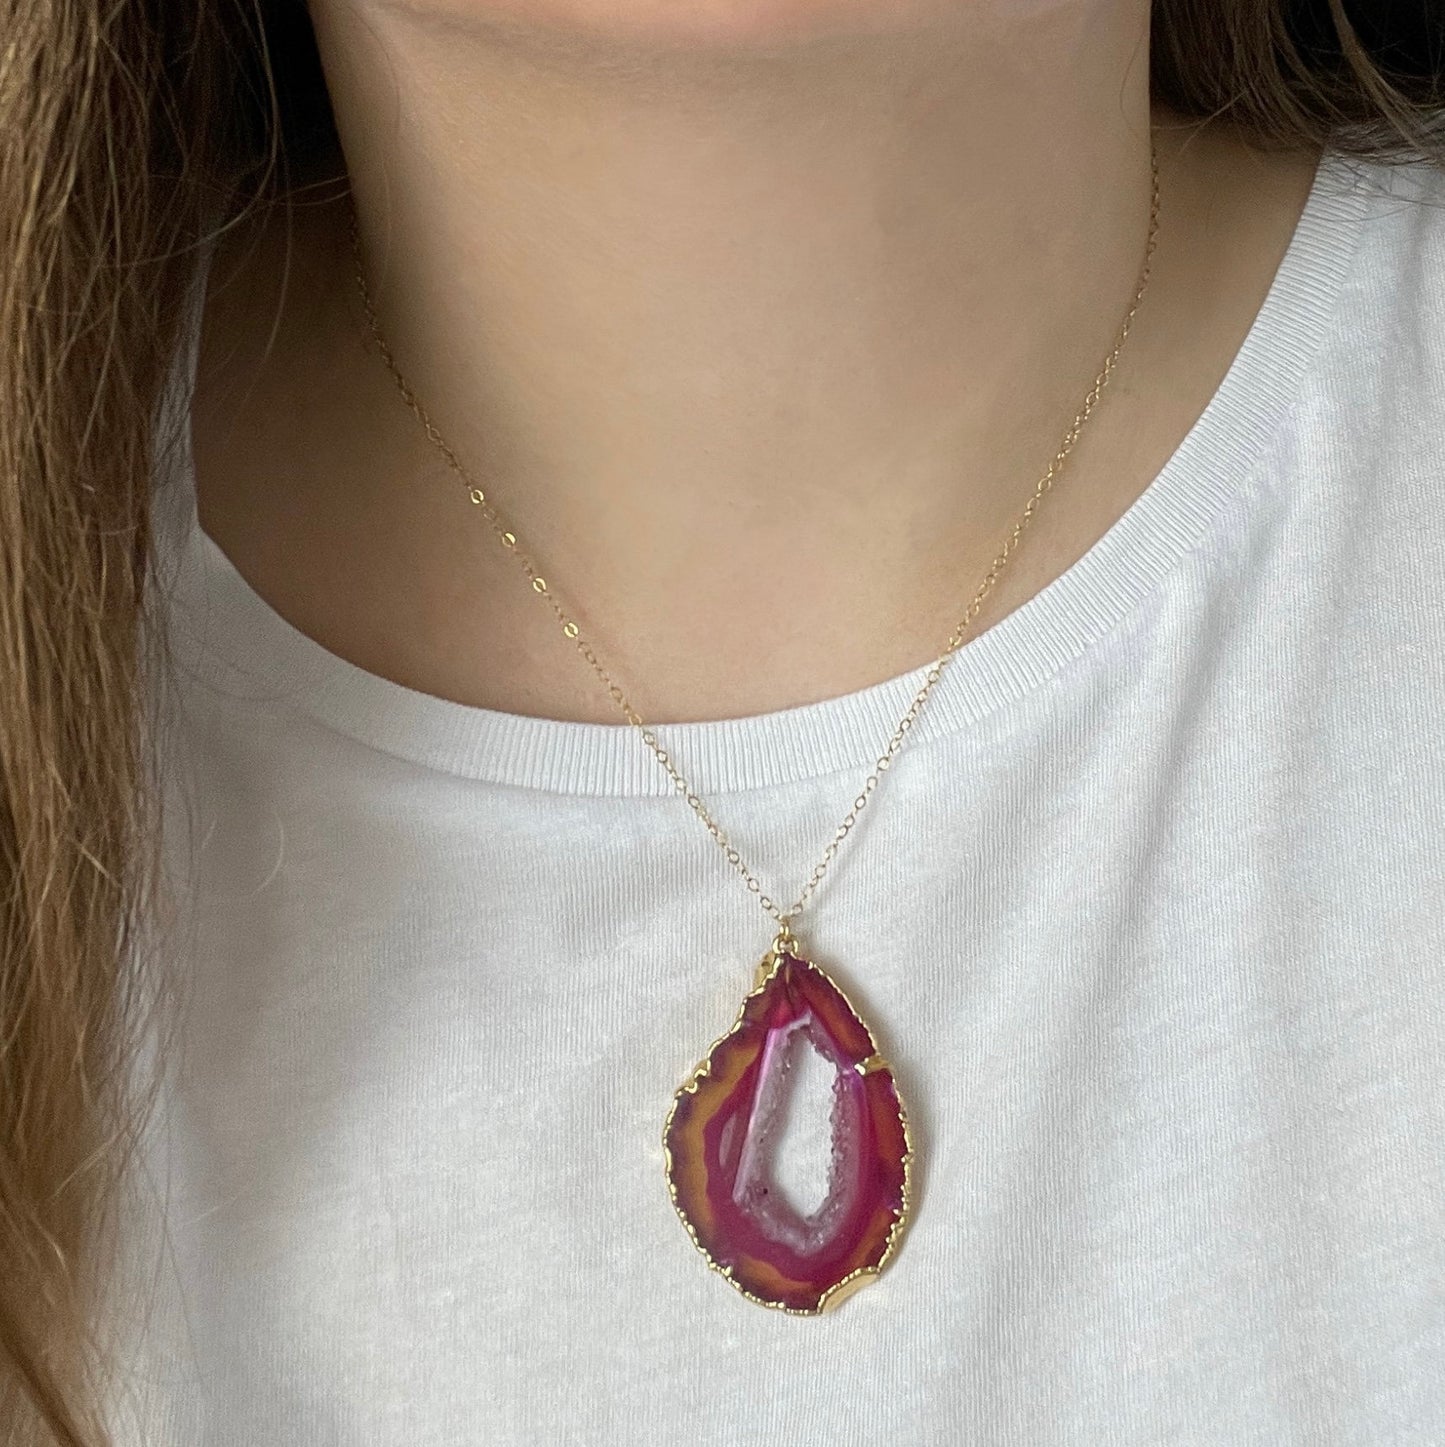 Gifts For Mom, Hot Pink Agate Pendant Necklace, Unique Geode Slice, Boho Raw Crystal Layer Gold, Mothers Gift, G13-527